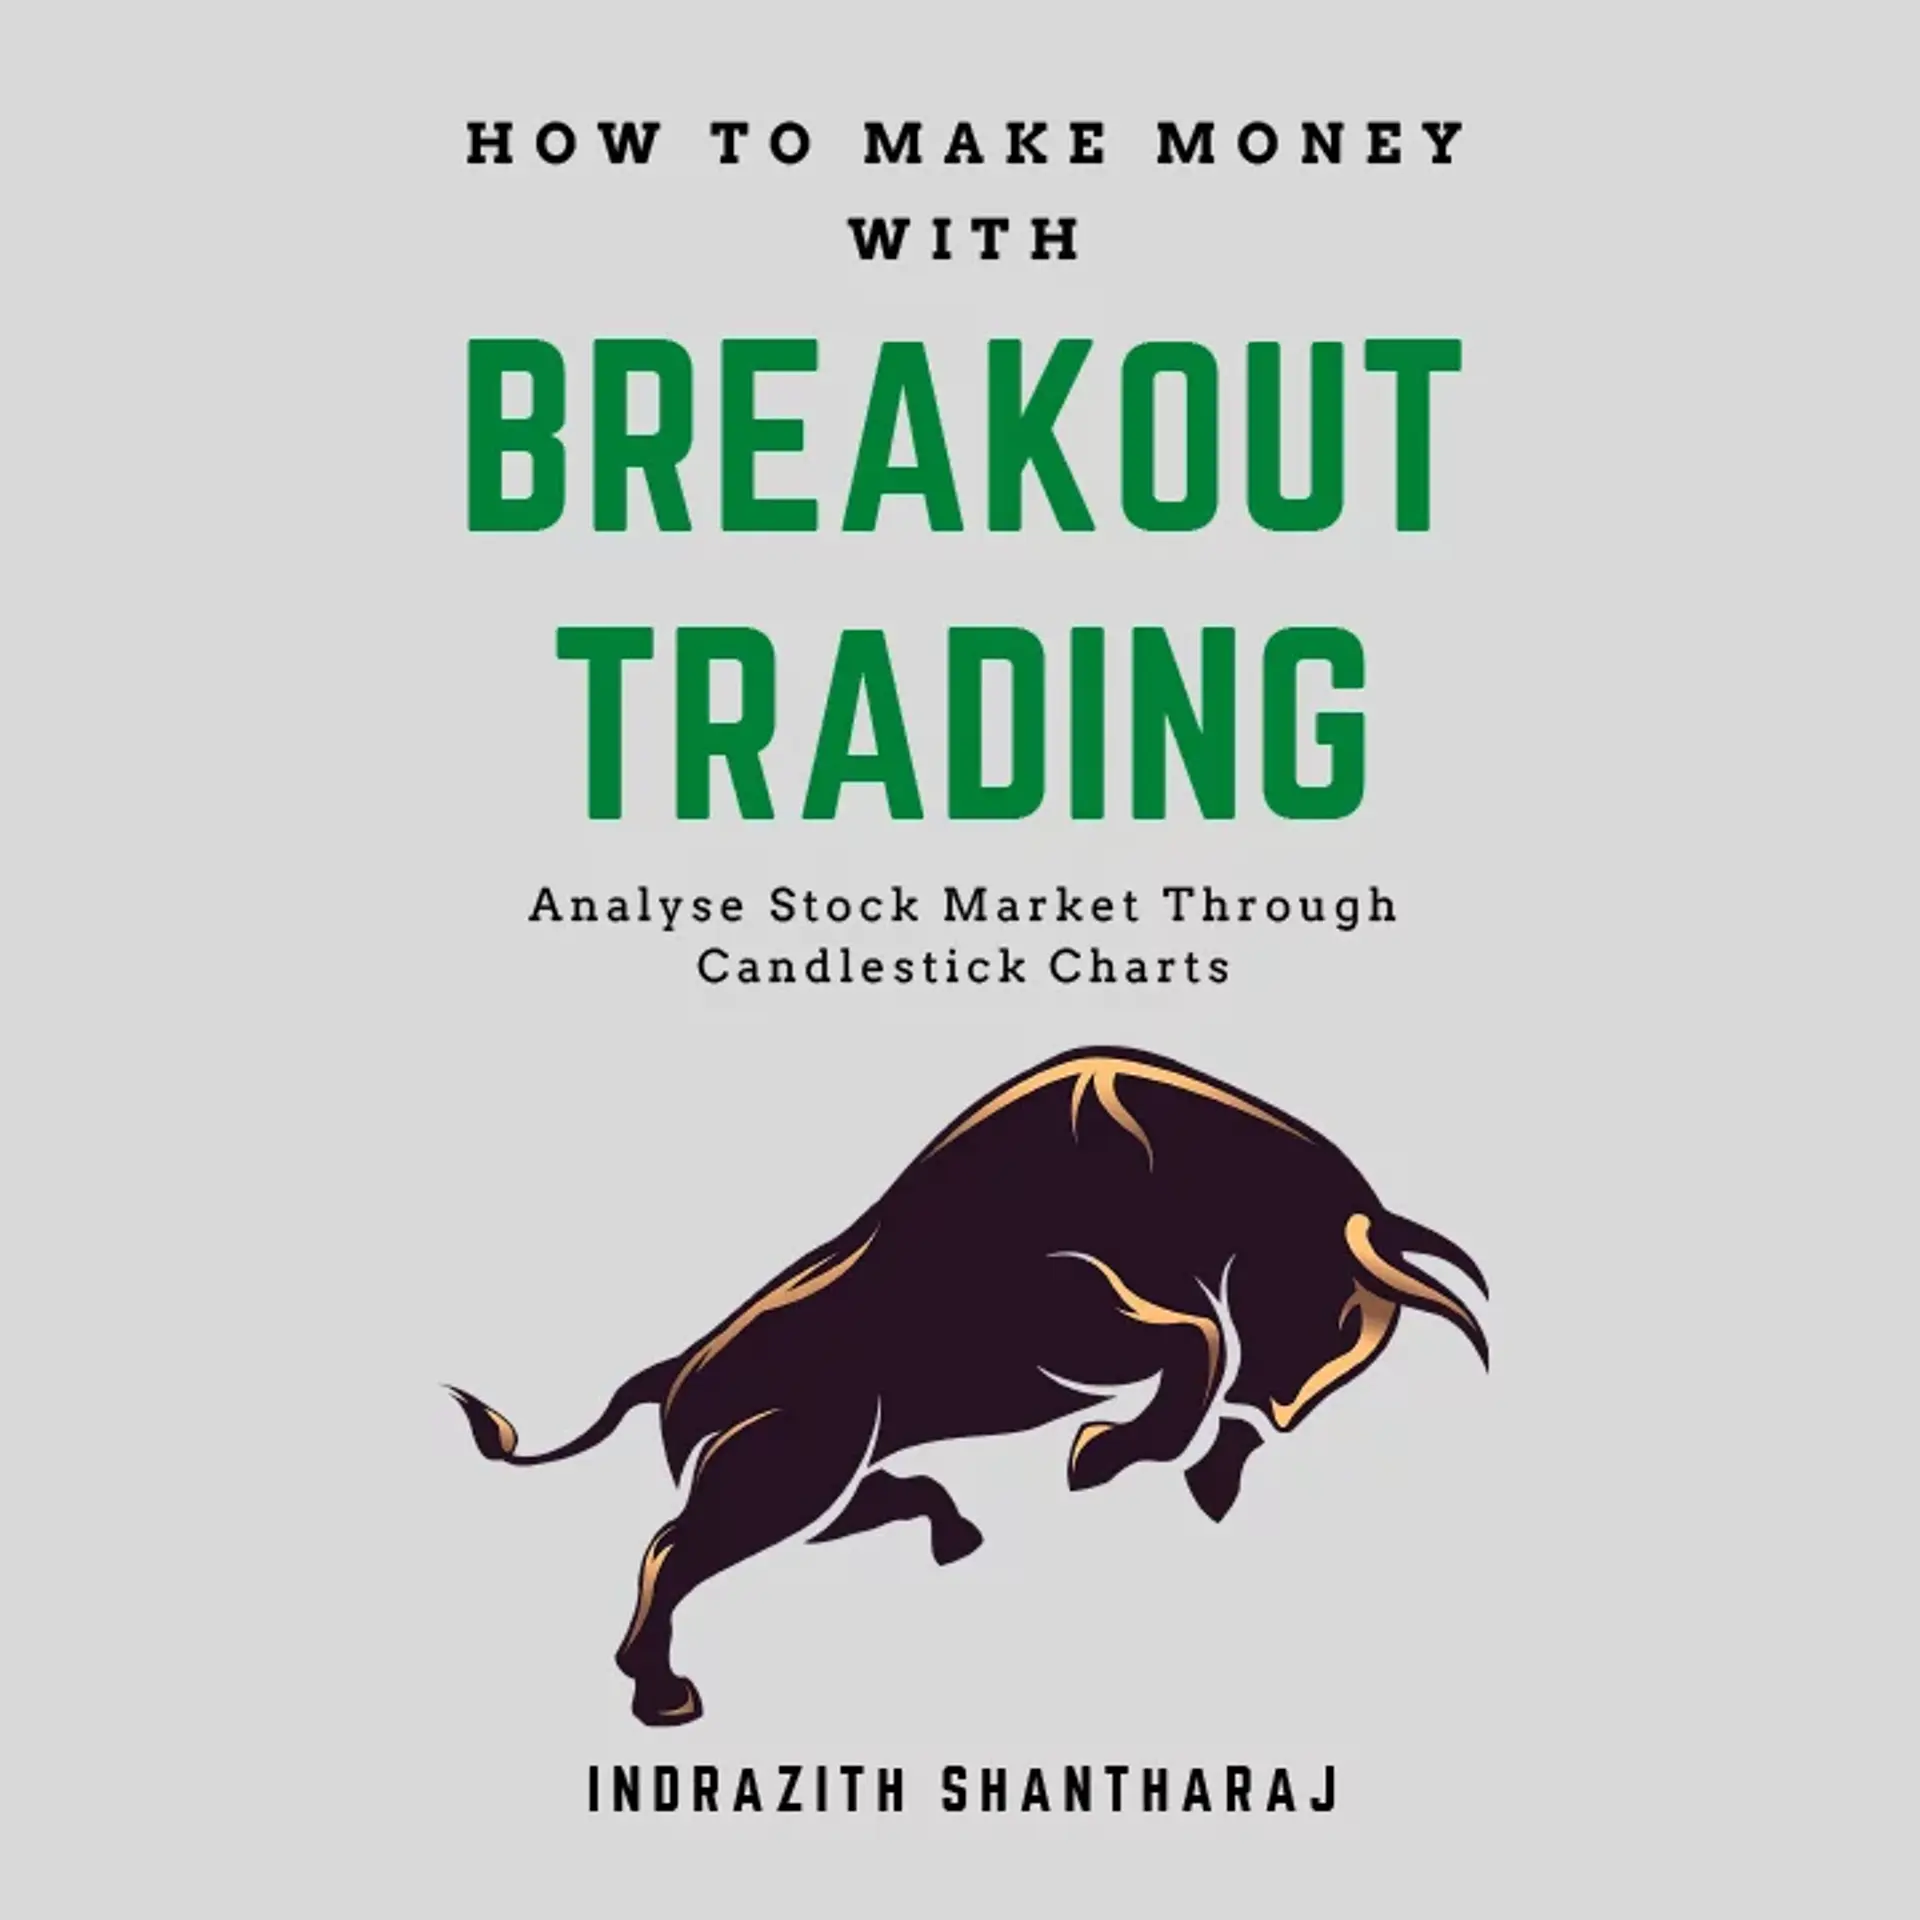 Chapter 4 - Execution Matters a Lot in Trading - Part 3